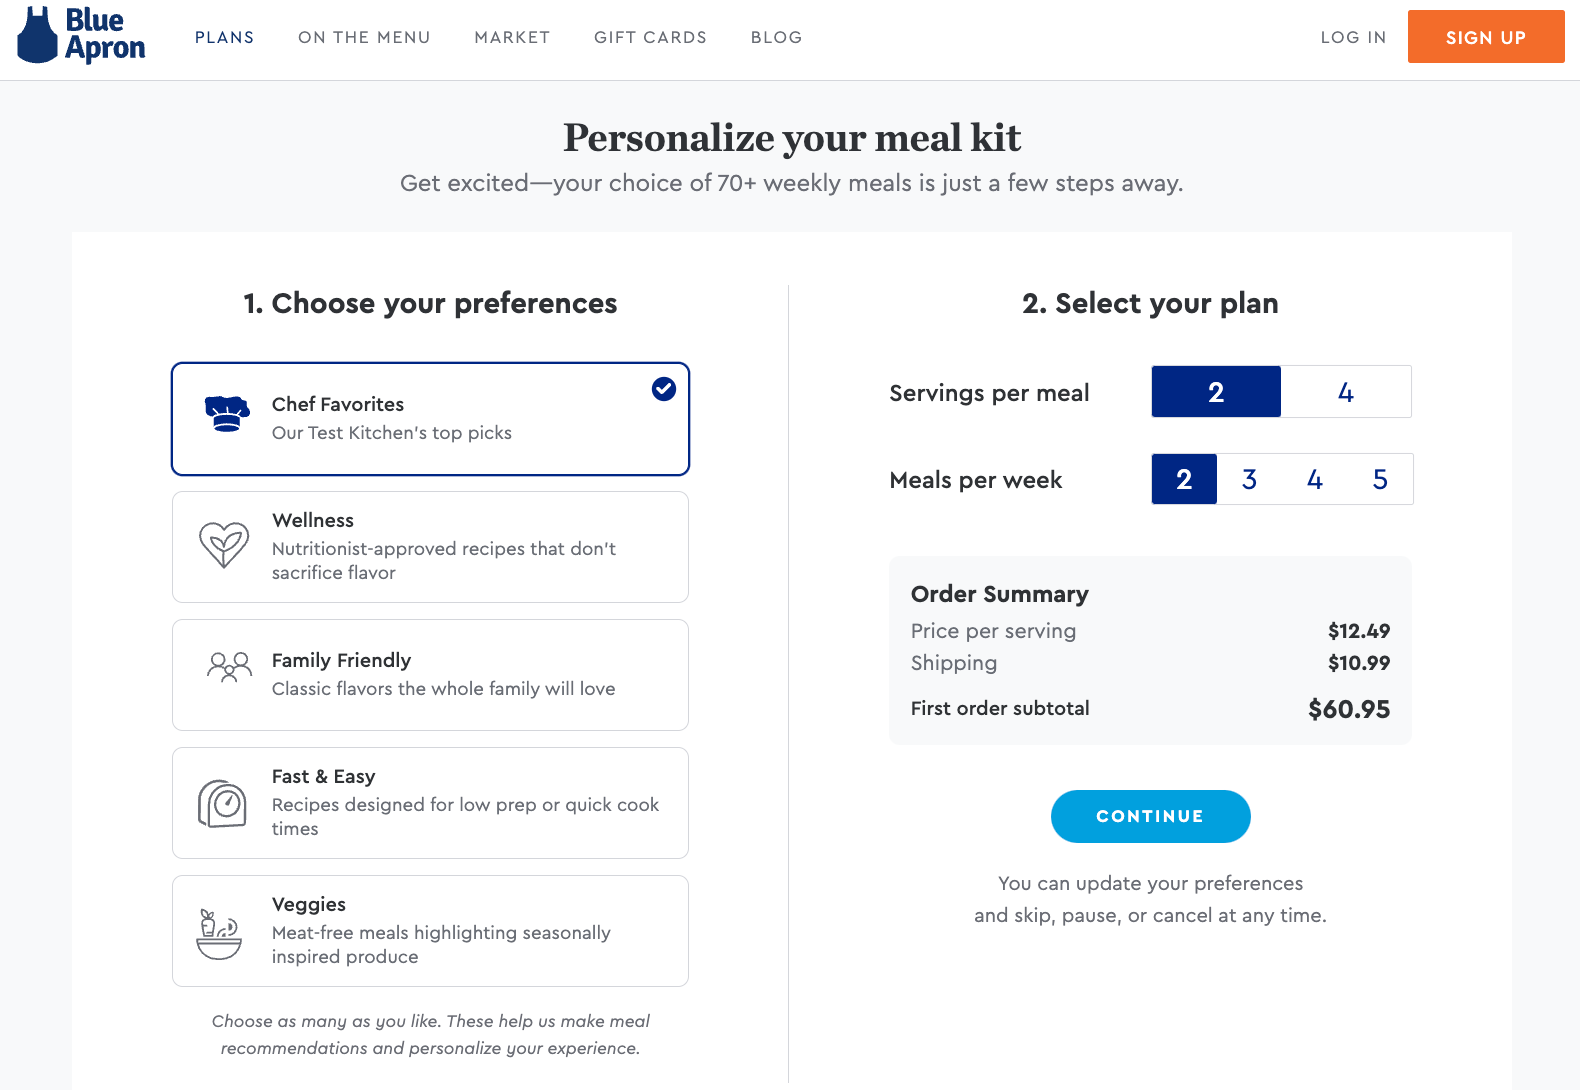 Personalize your meal kit UX and checkout cart for blue apron